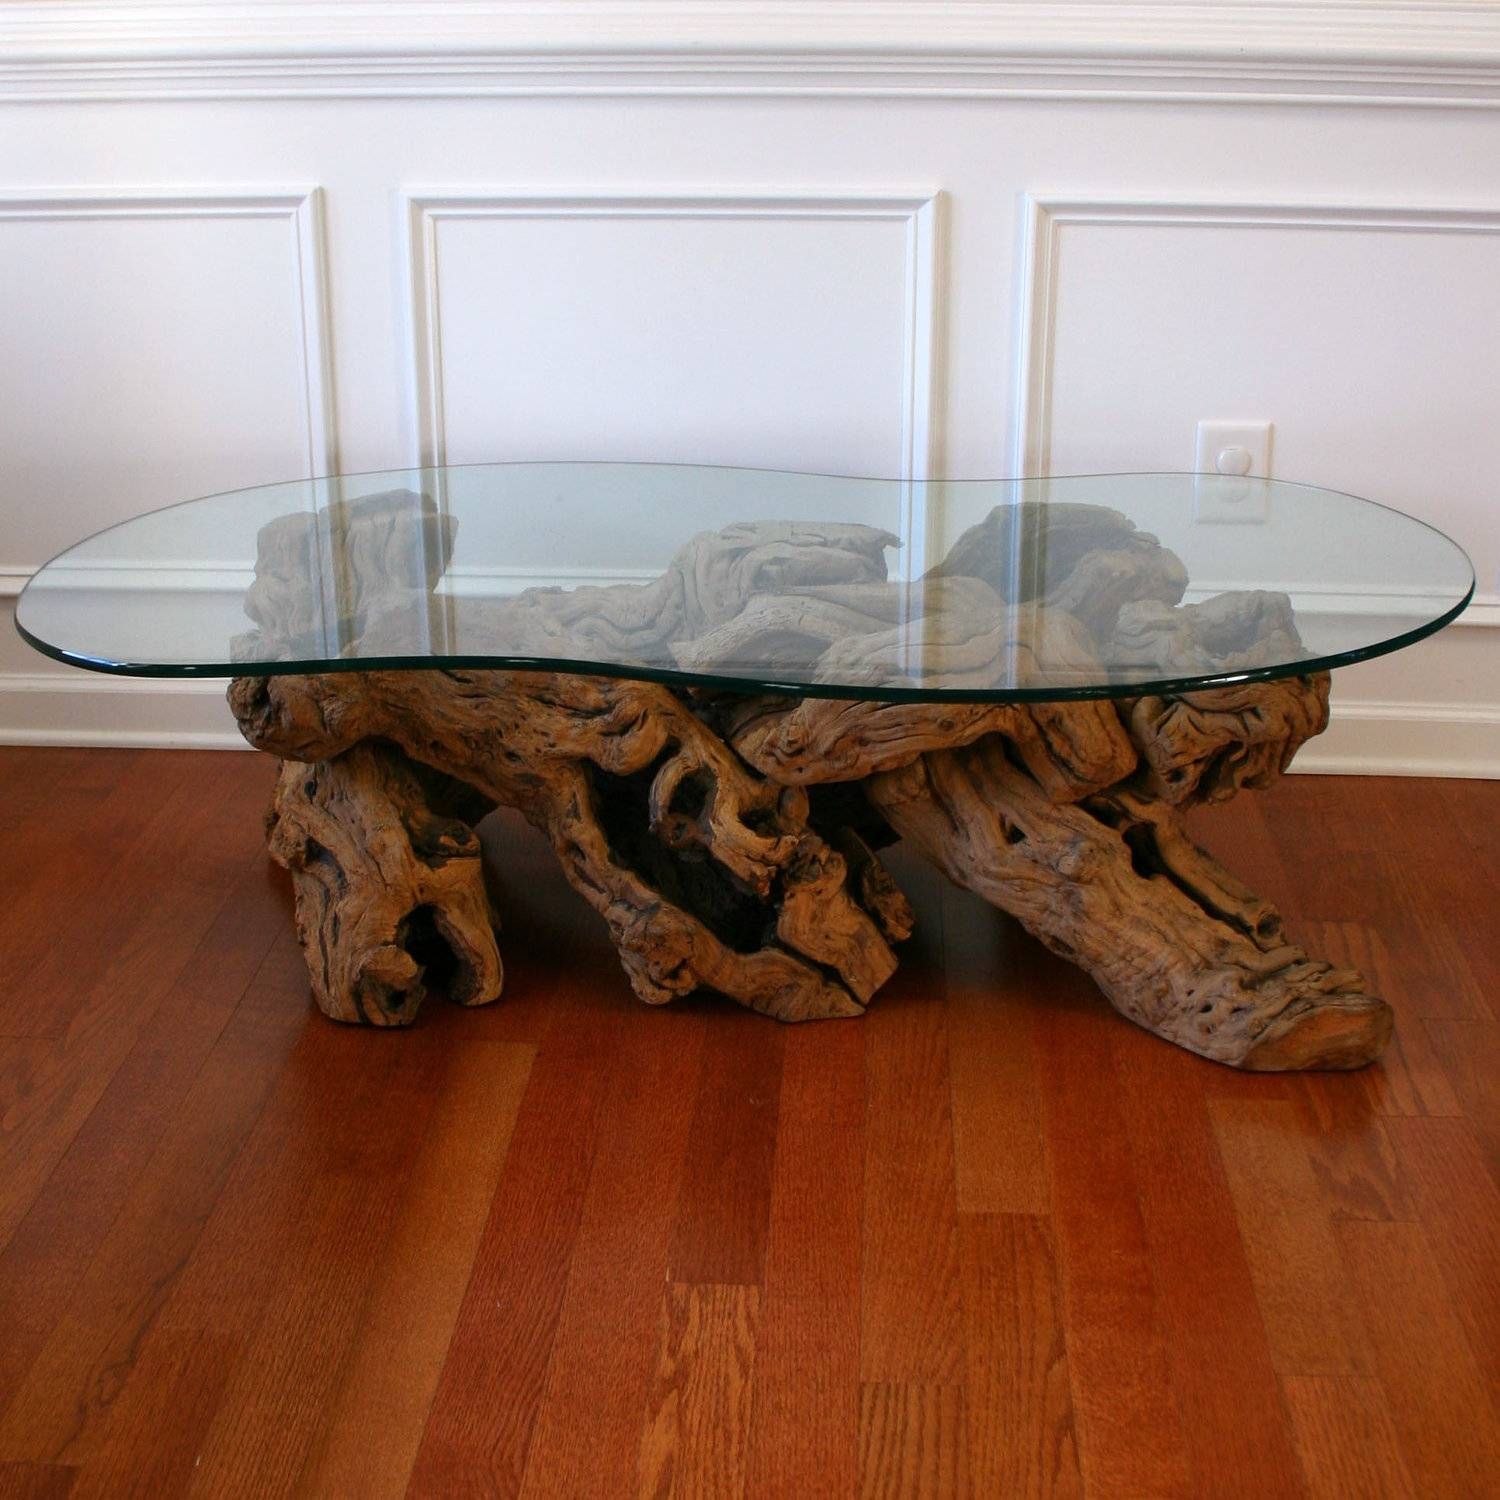 Glass Top Coffee Table With Wood Base | Coffee Tables Decoration Throughout Quality Coffee Tables (View 1 of 30)